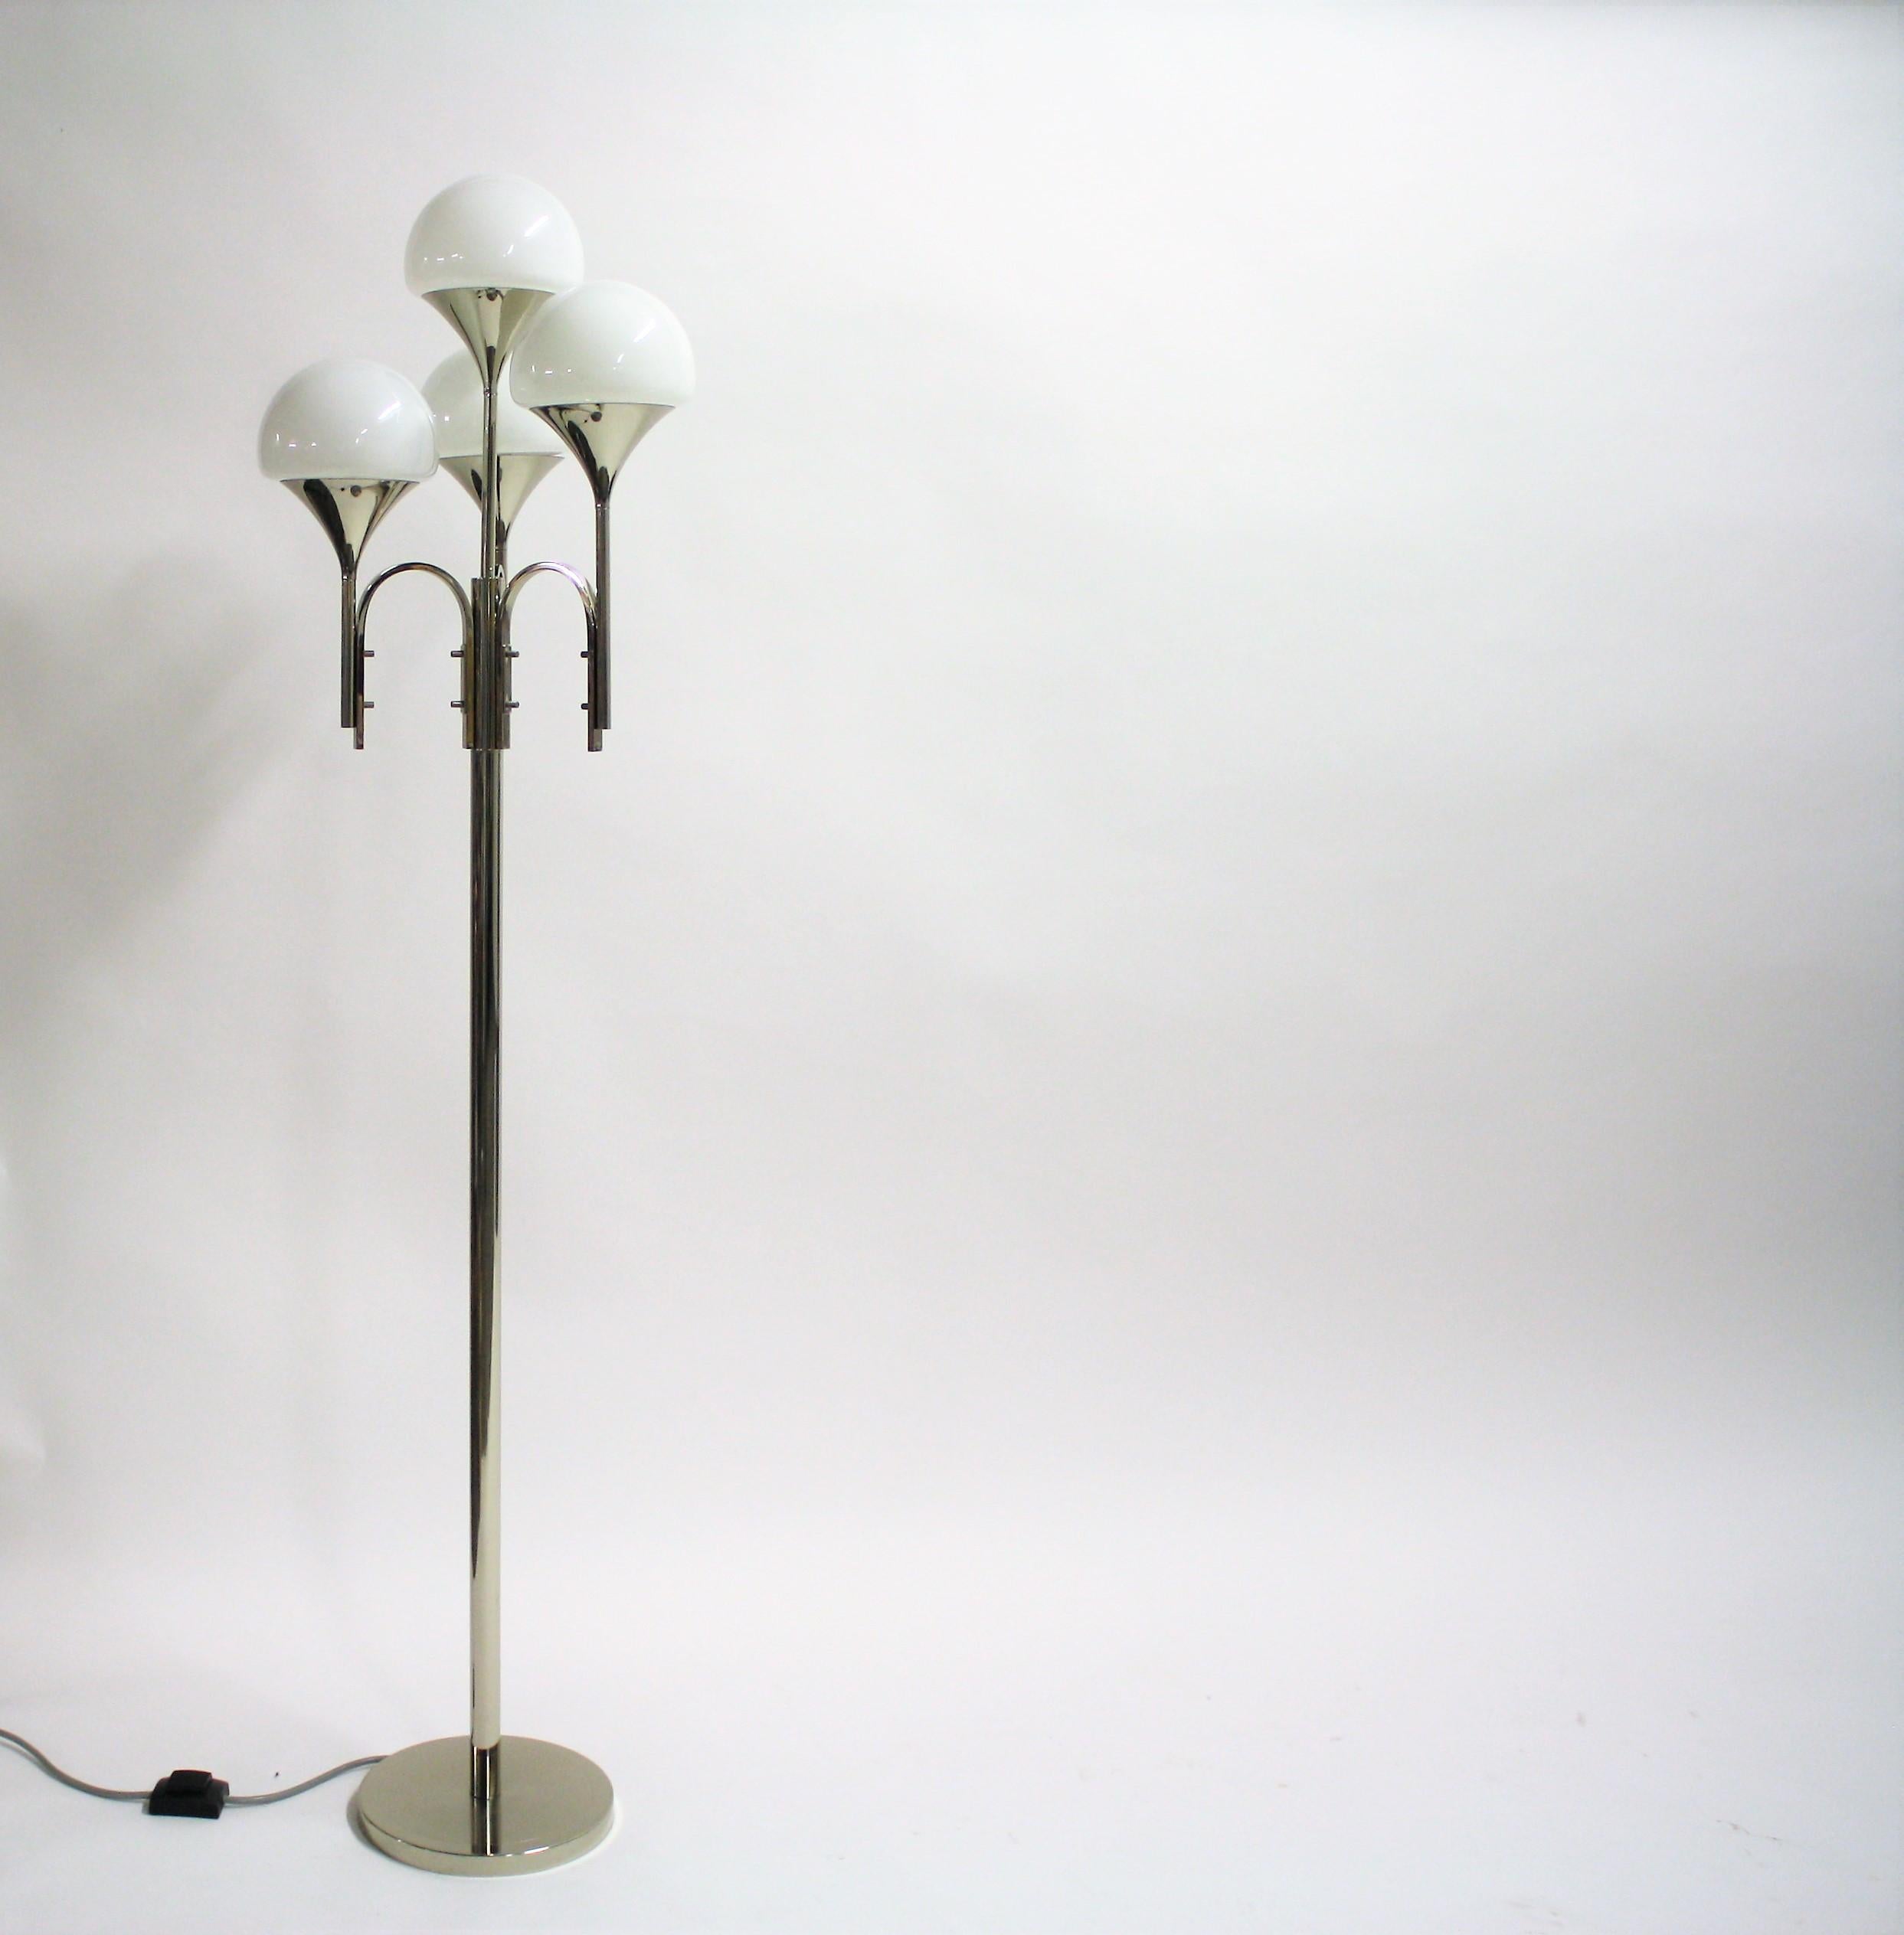 Mid century modern chrome trumpet shaped floor lamp by Reggiani.

Very good condition, original globes.

Works with regular E14 candelabra light bulbs.

Tested and ready to use.

1970s, Italy

Dimensions:
Height: 162cm/64”
Width x depth: